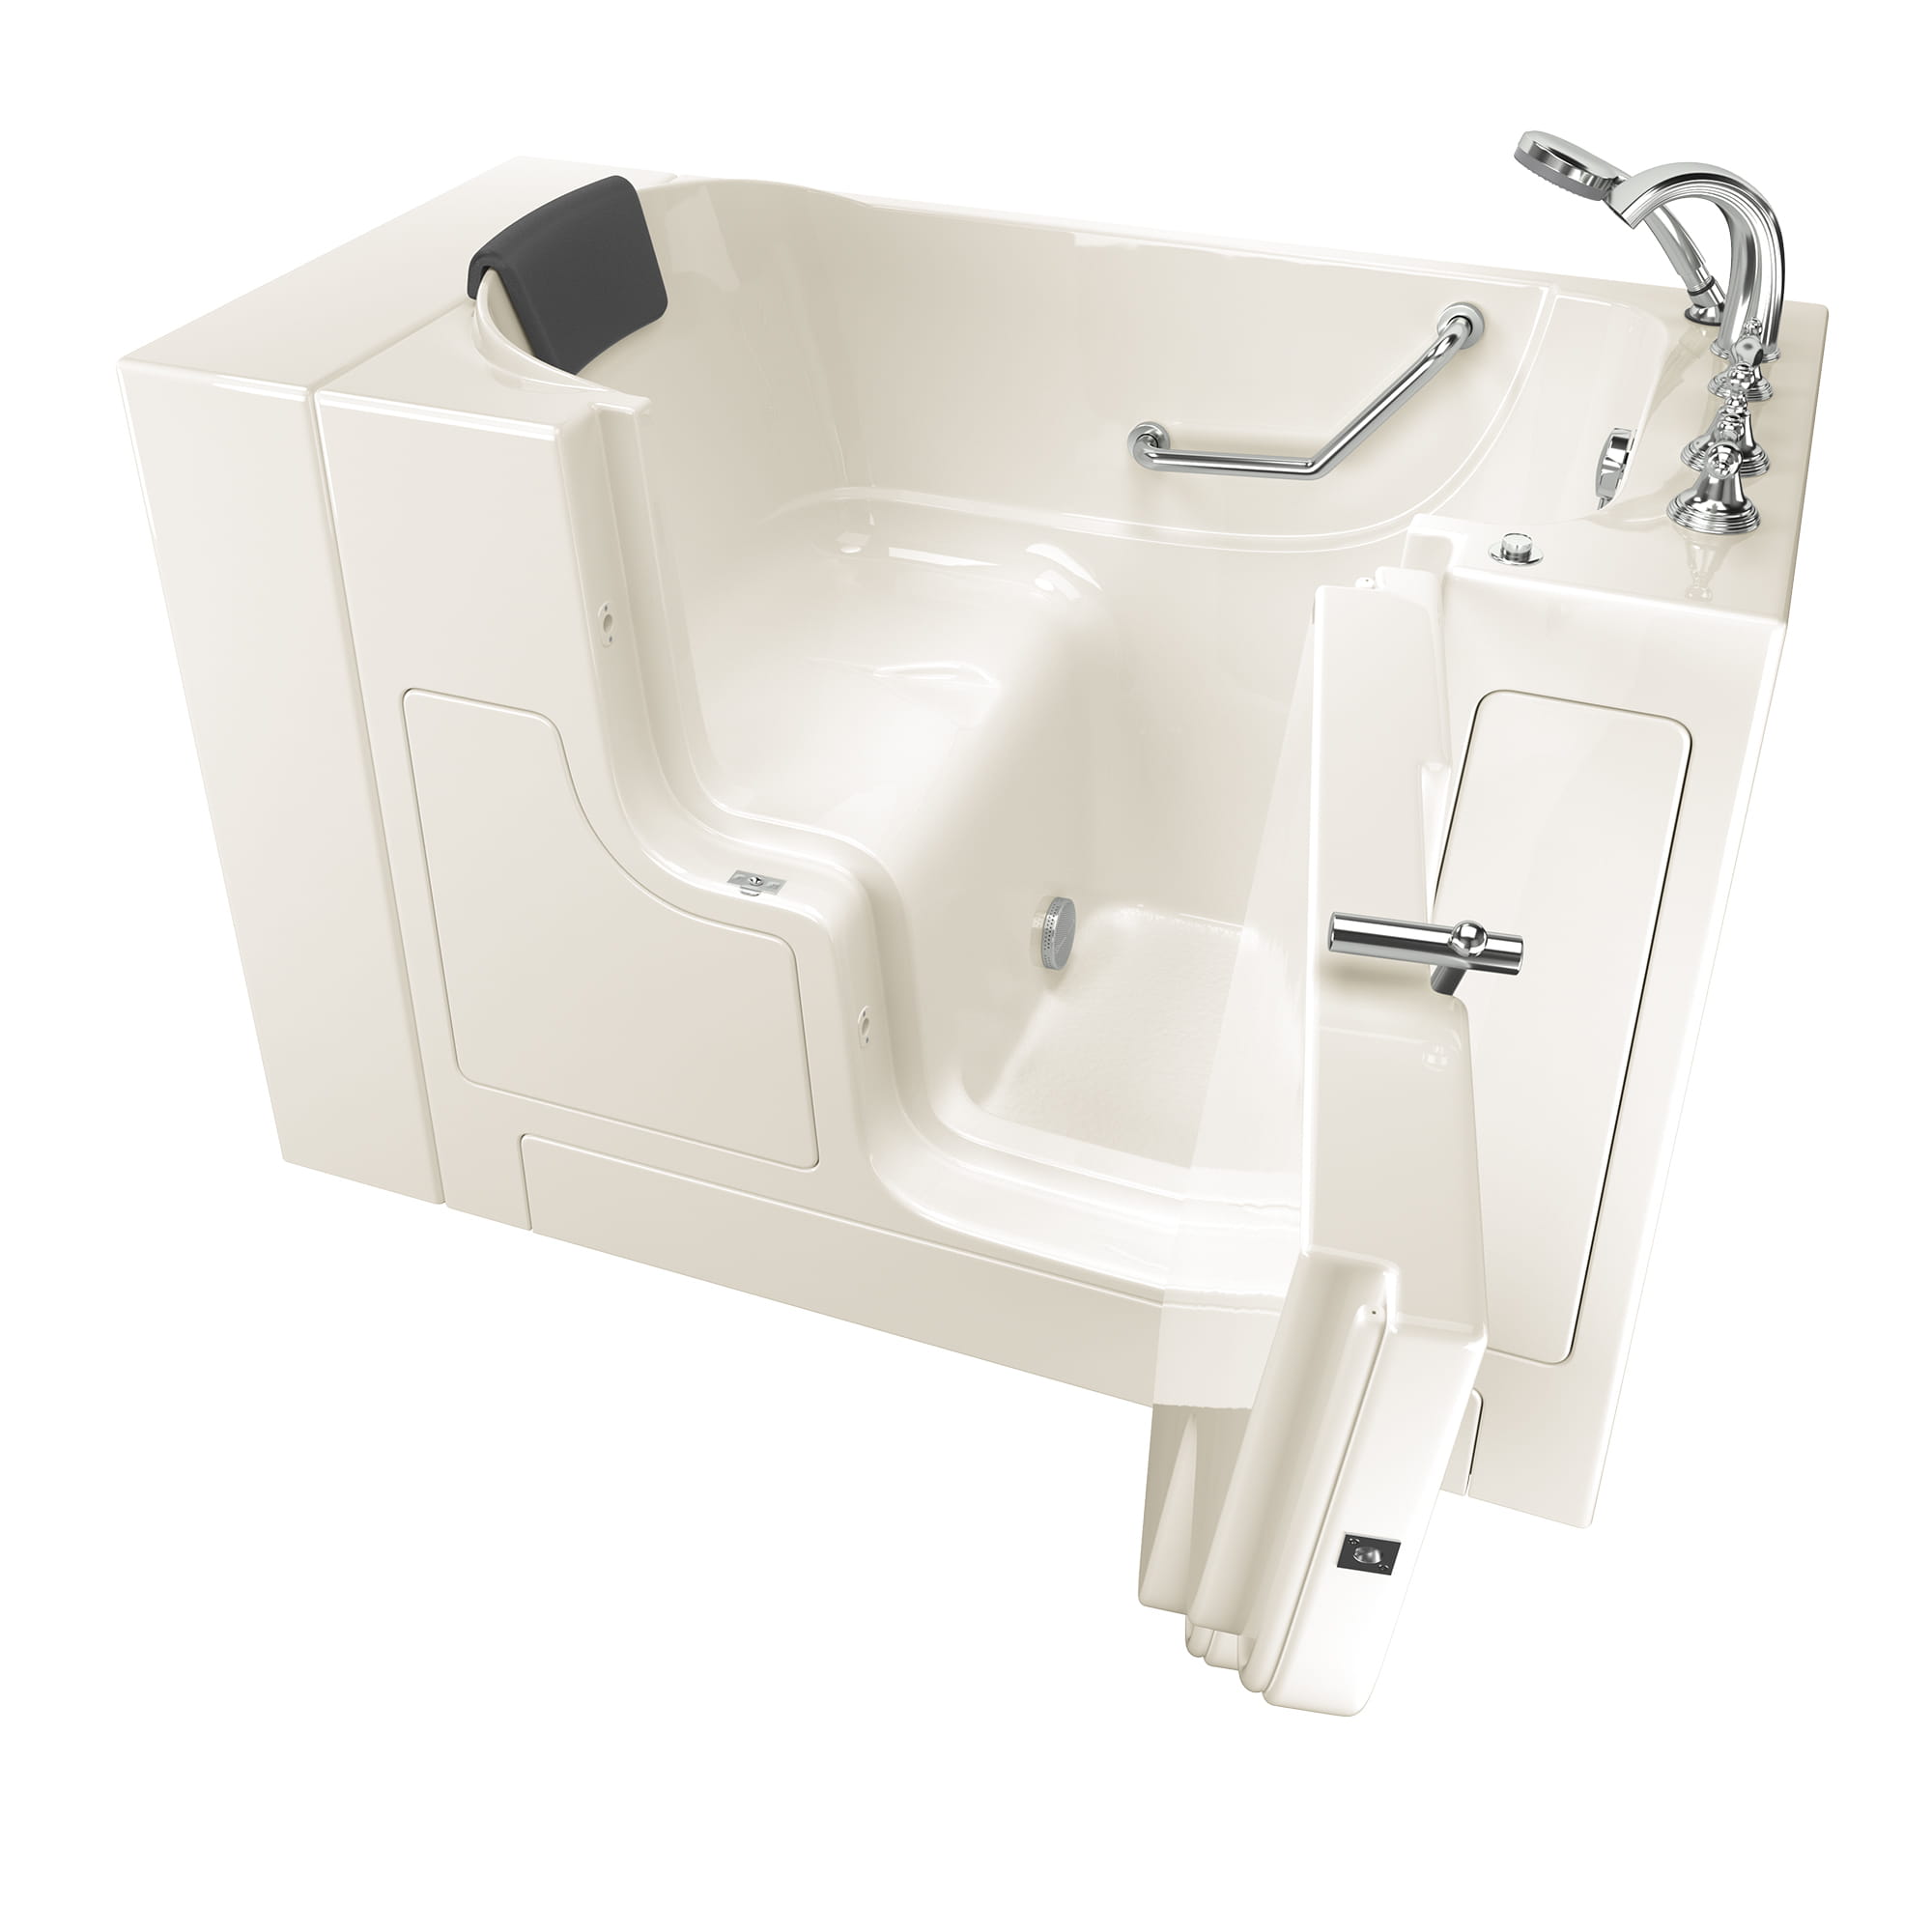 Gelcoat Premium Series 30 x 52 -Inch Walk-in Tub With Soaker System - Right-Hand Drain With Faucet